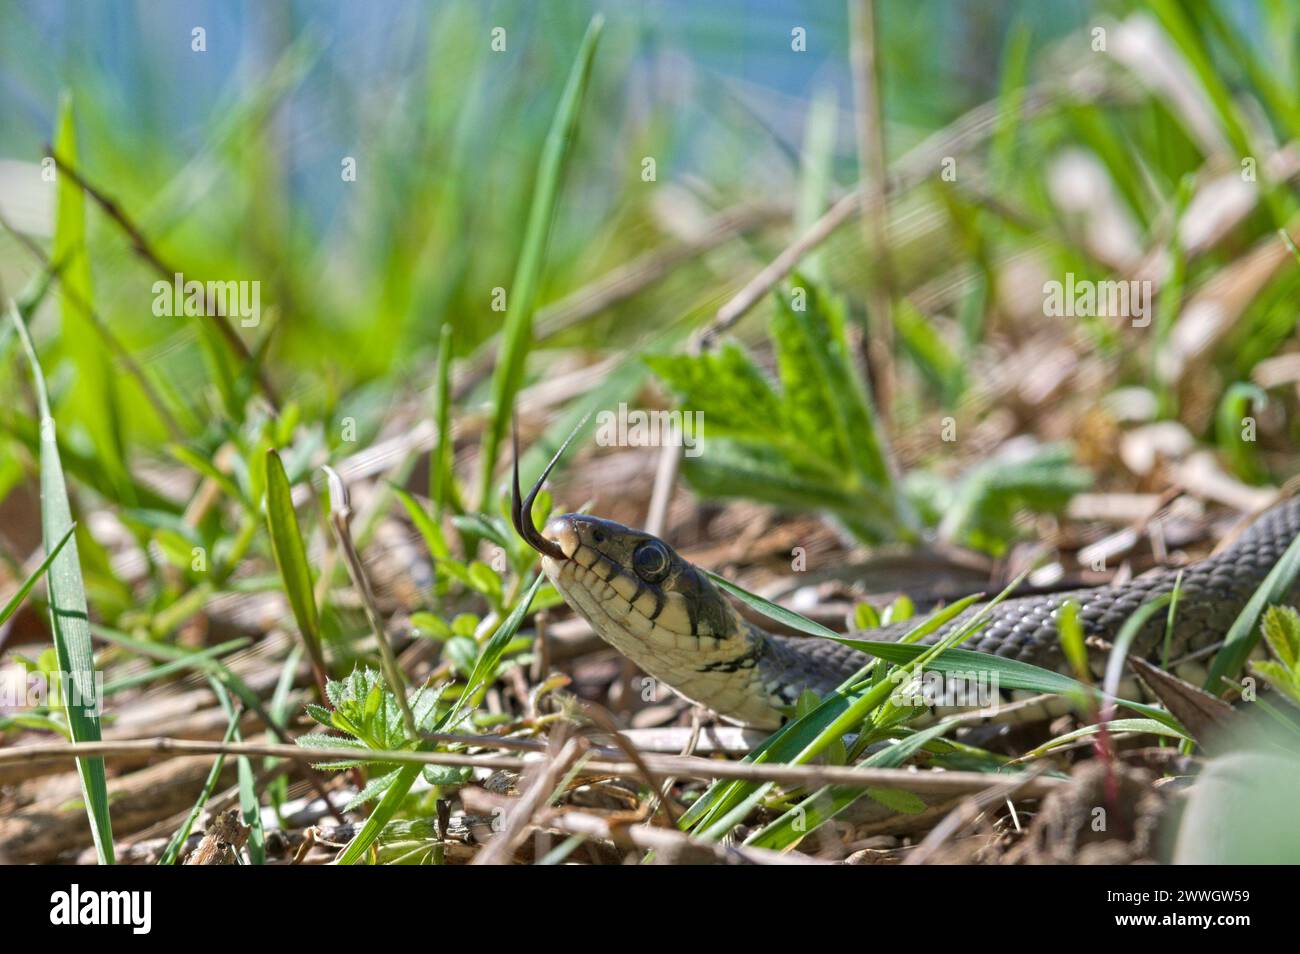 Natrix natrix aka Common Grass Snake in the grass. Visible forked tongue. Most common snake in Czech republic. Stock Photo